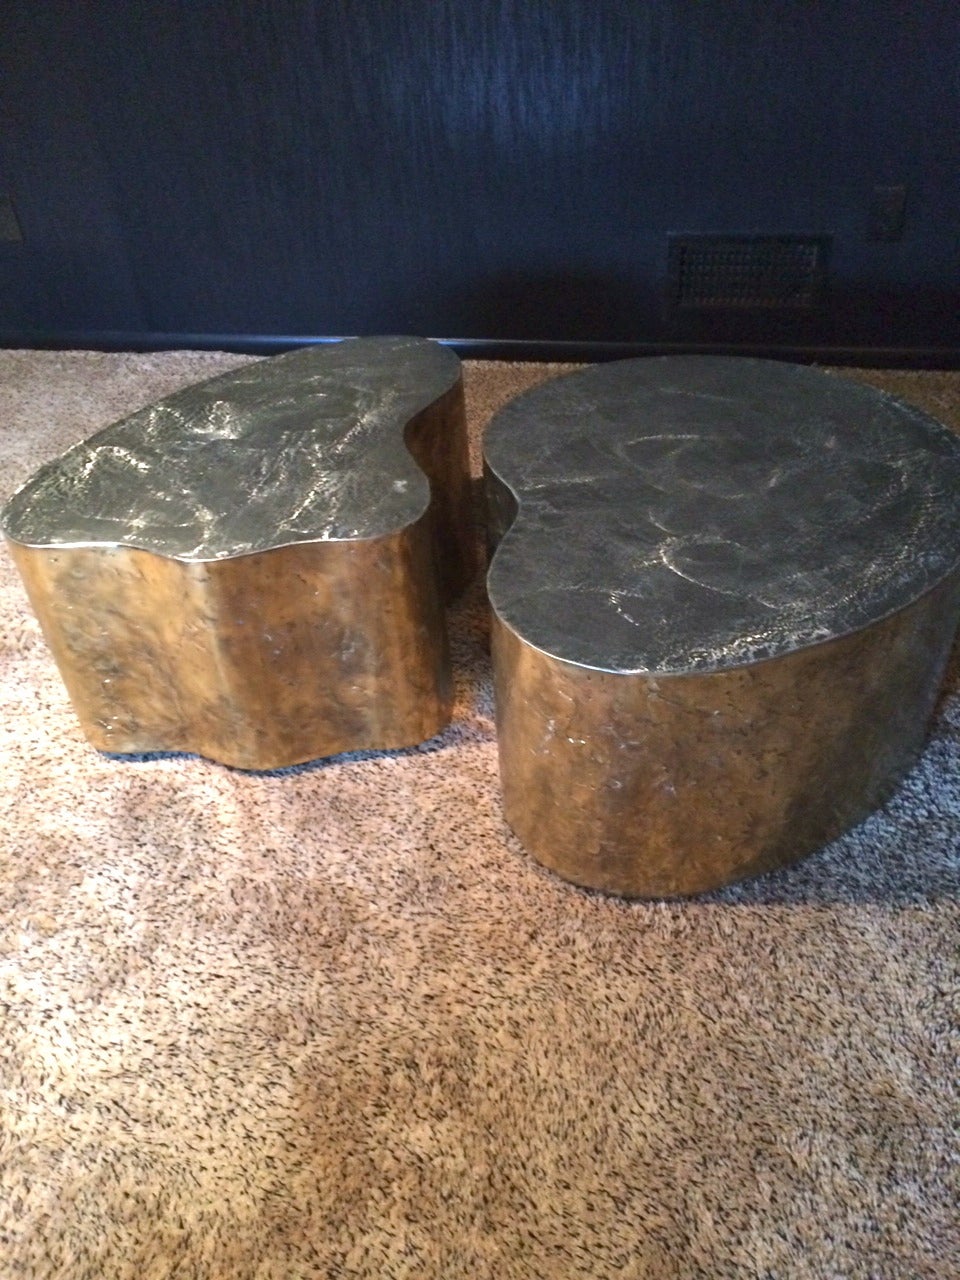 A pair of Silas Seandel vintage free-form tables on casters.   Very versatile as can be utilized together as a coffee or cocktail table, or split up as side tables. They are patinated, hammered brass/bronze finish.
Signed
Dimensions